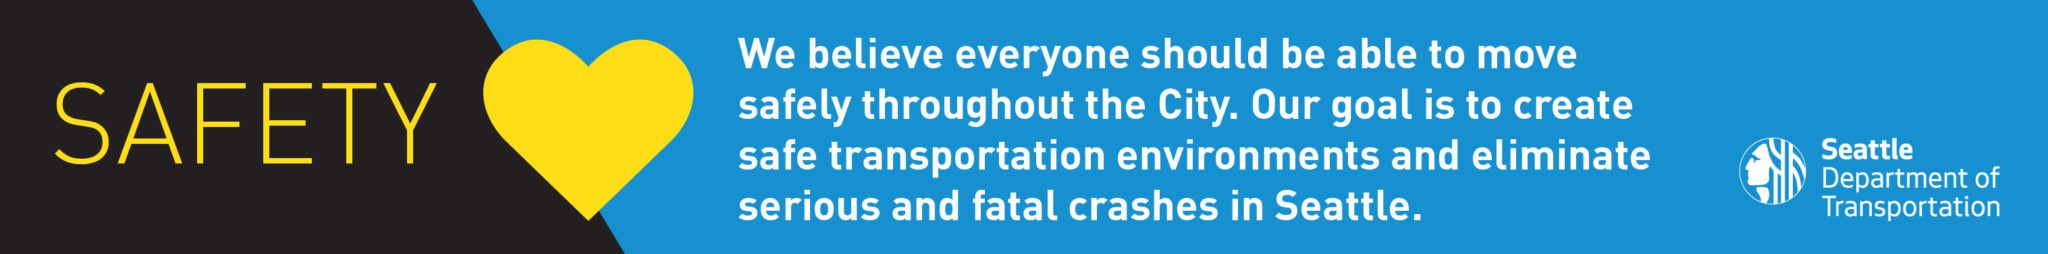 Graphic detailing safety as one of SDOT's core values and goals. A yellow heart icon and black and blue background, as well as the SDOT logo, are included.